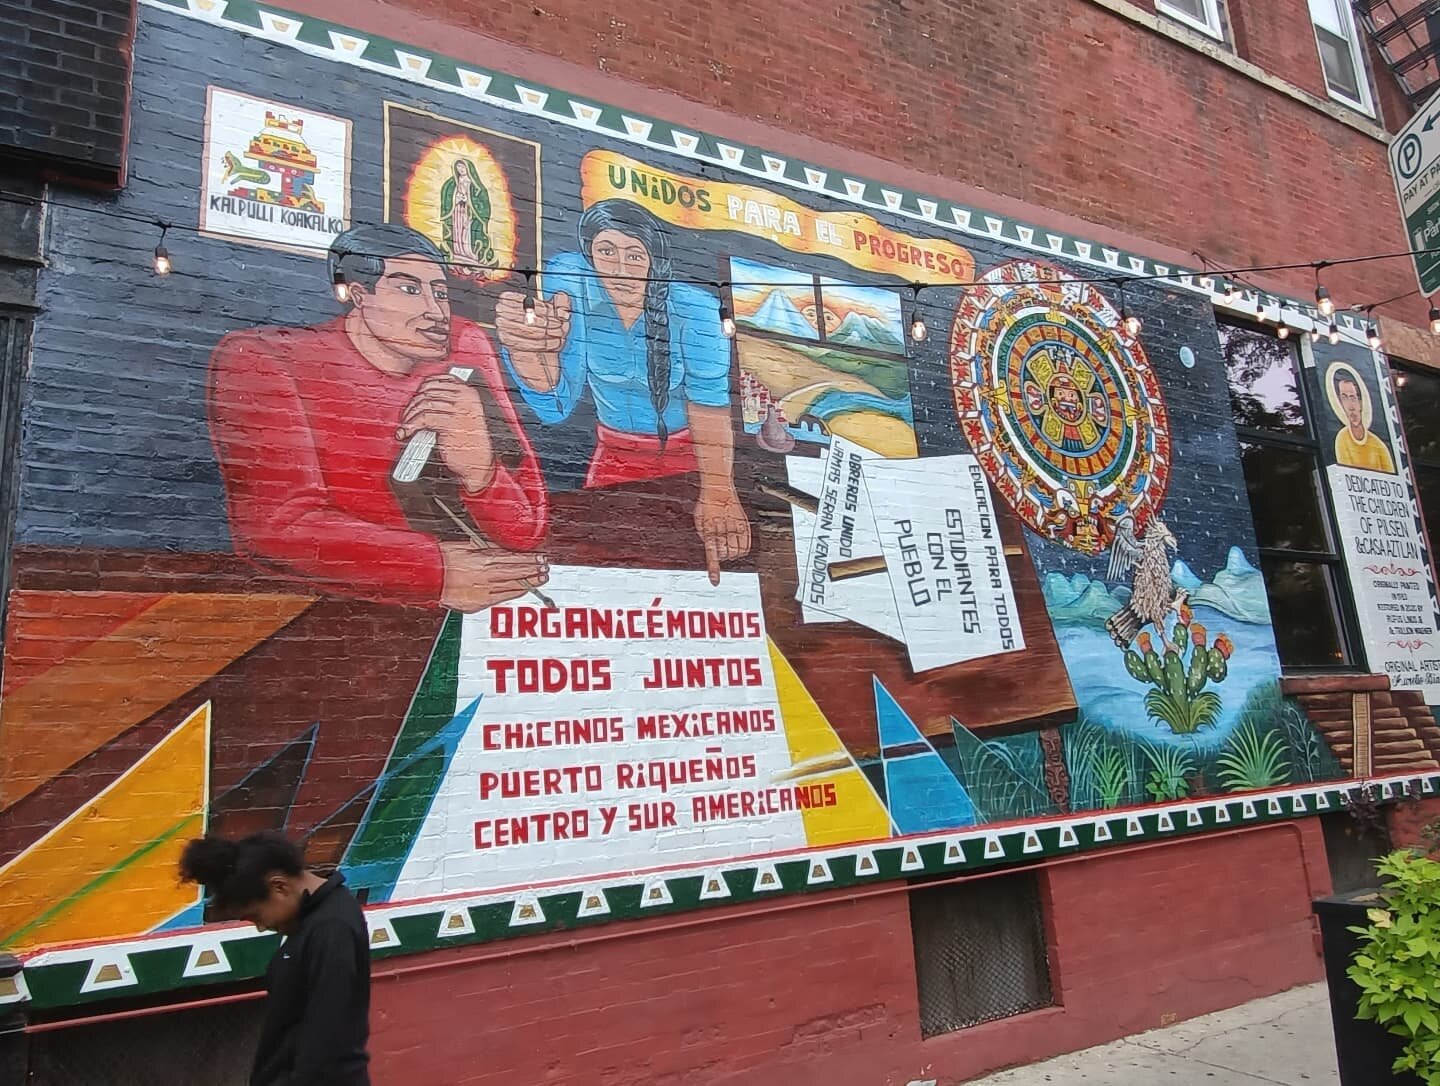 This mural by Aurelio D&iacute;az, restored by Rufus Linus will be one of several murals we'll discuss next week for the virtual tour of 18th street. Please join us! Link in bio